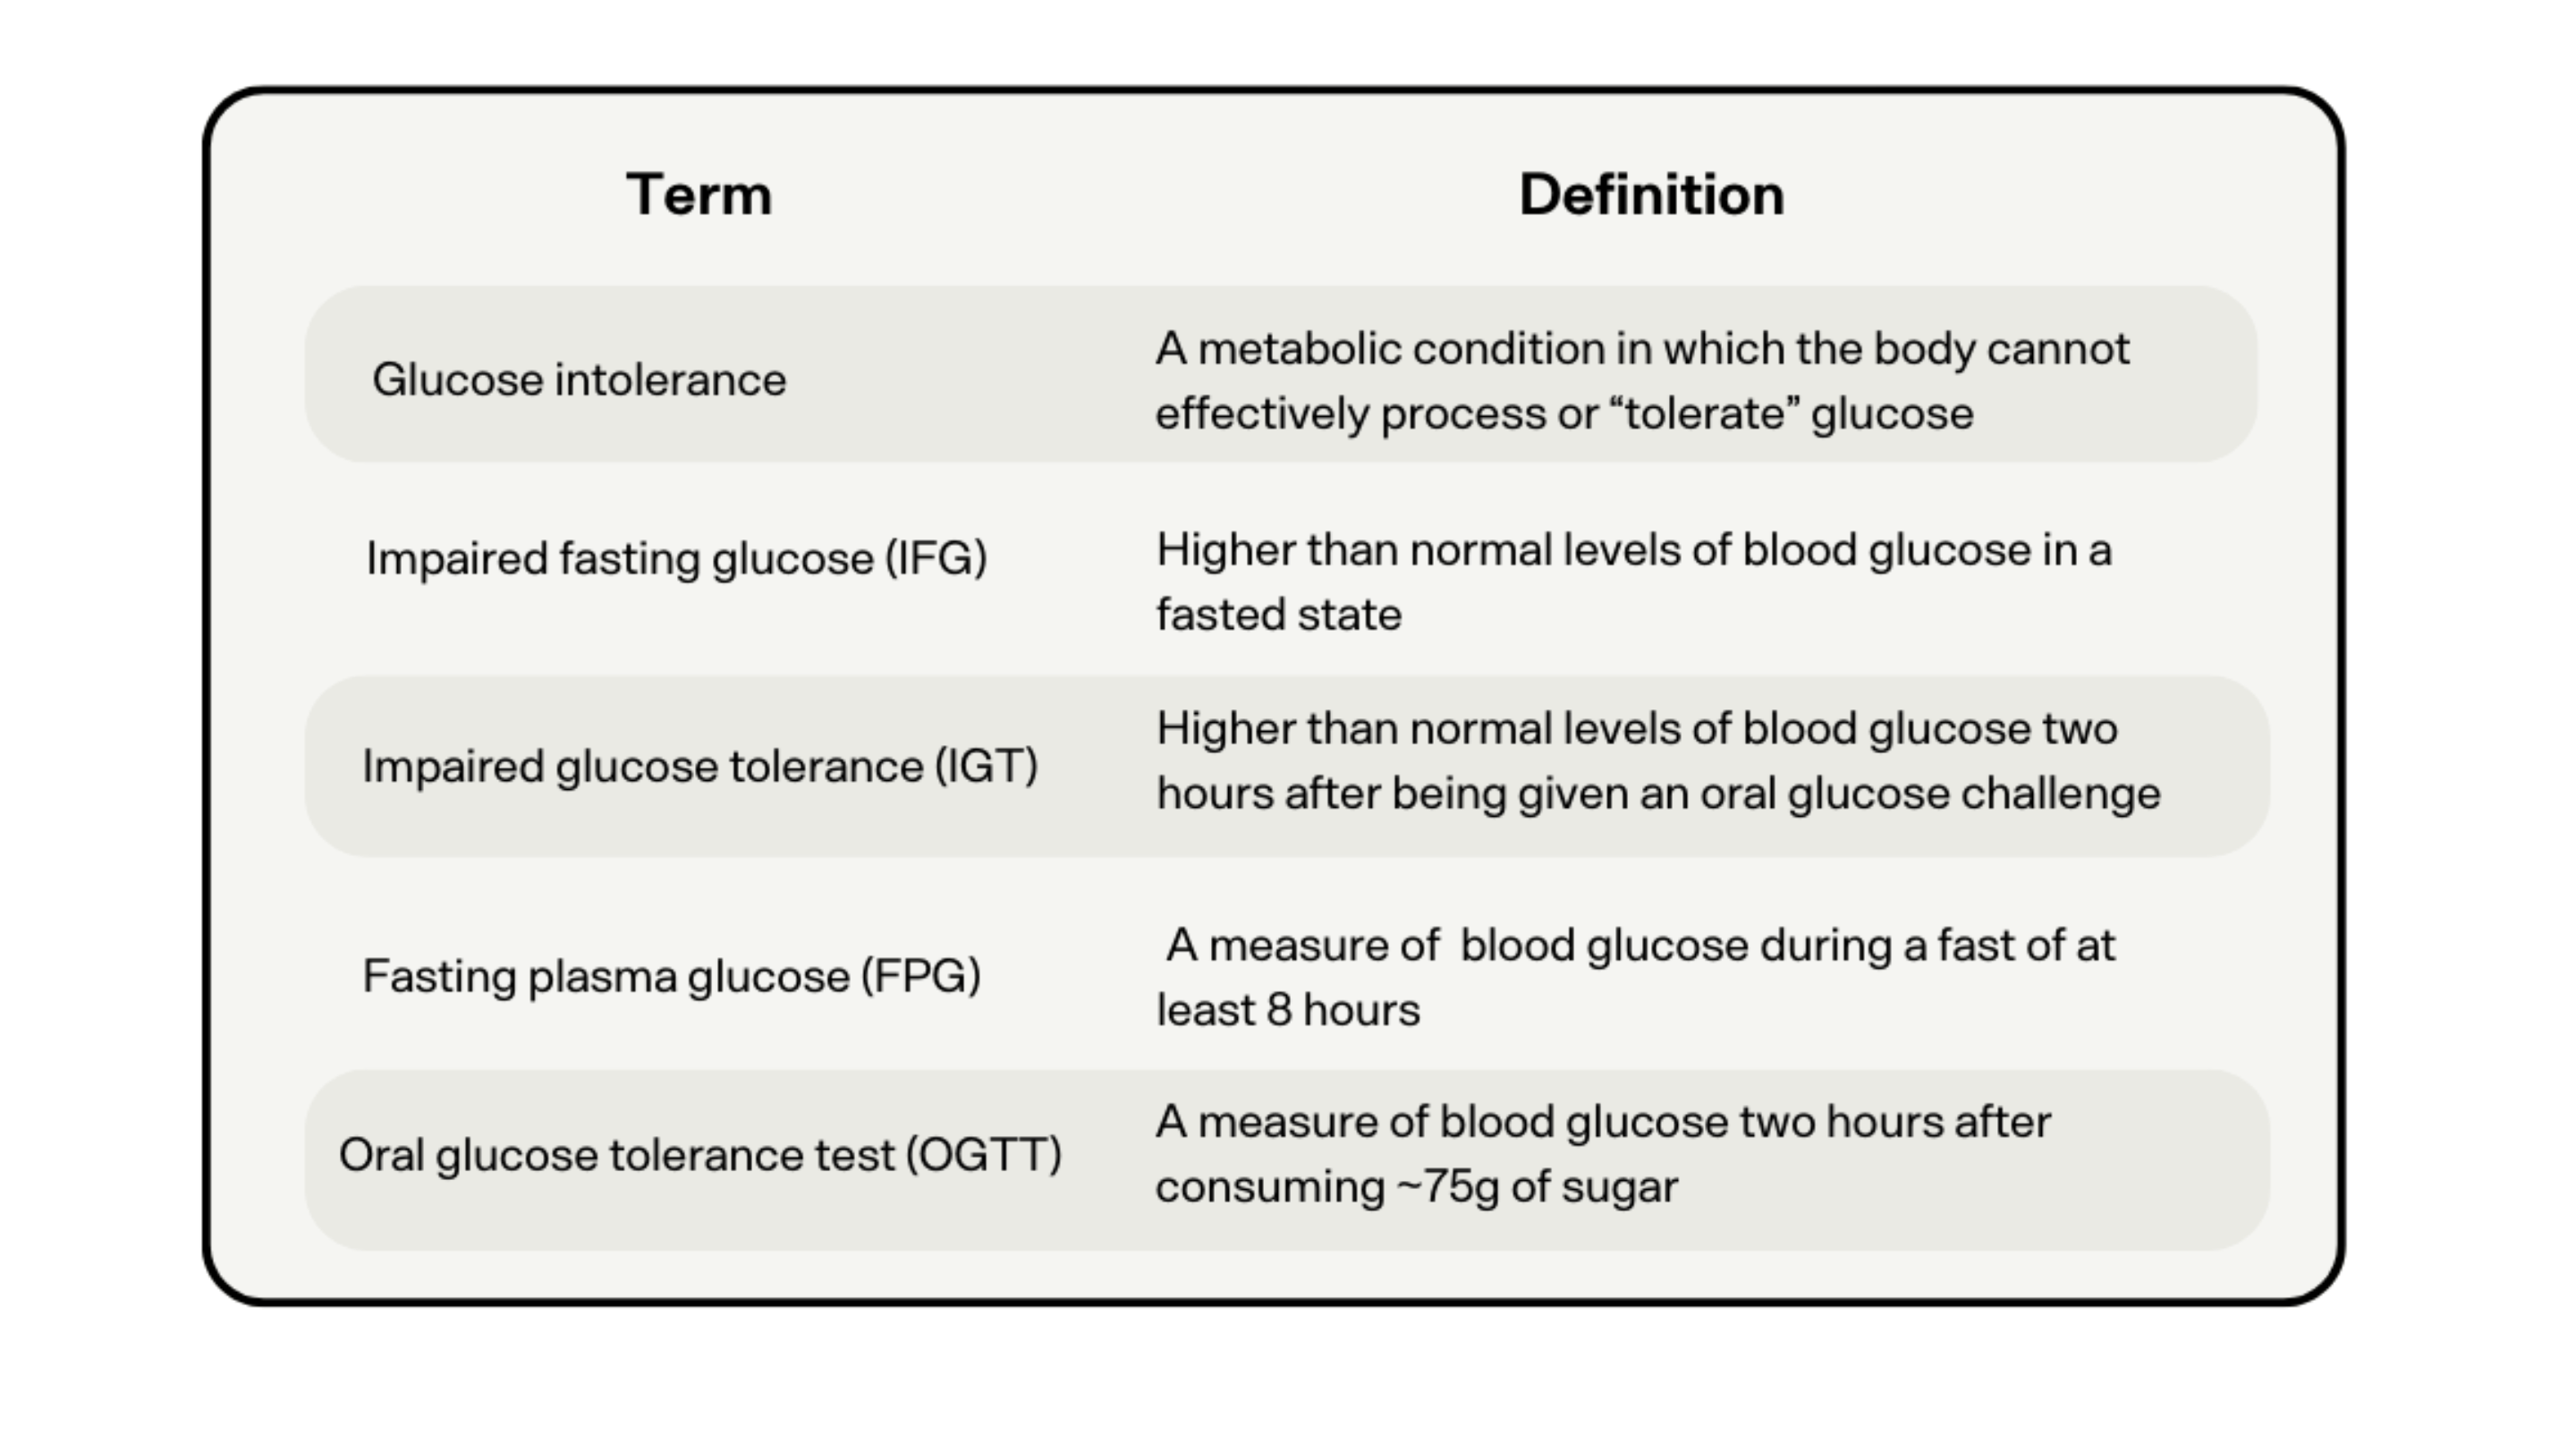 chart defining terms related to glucose intolerance